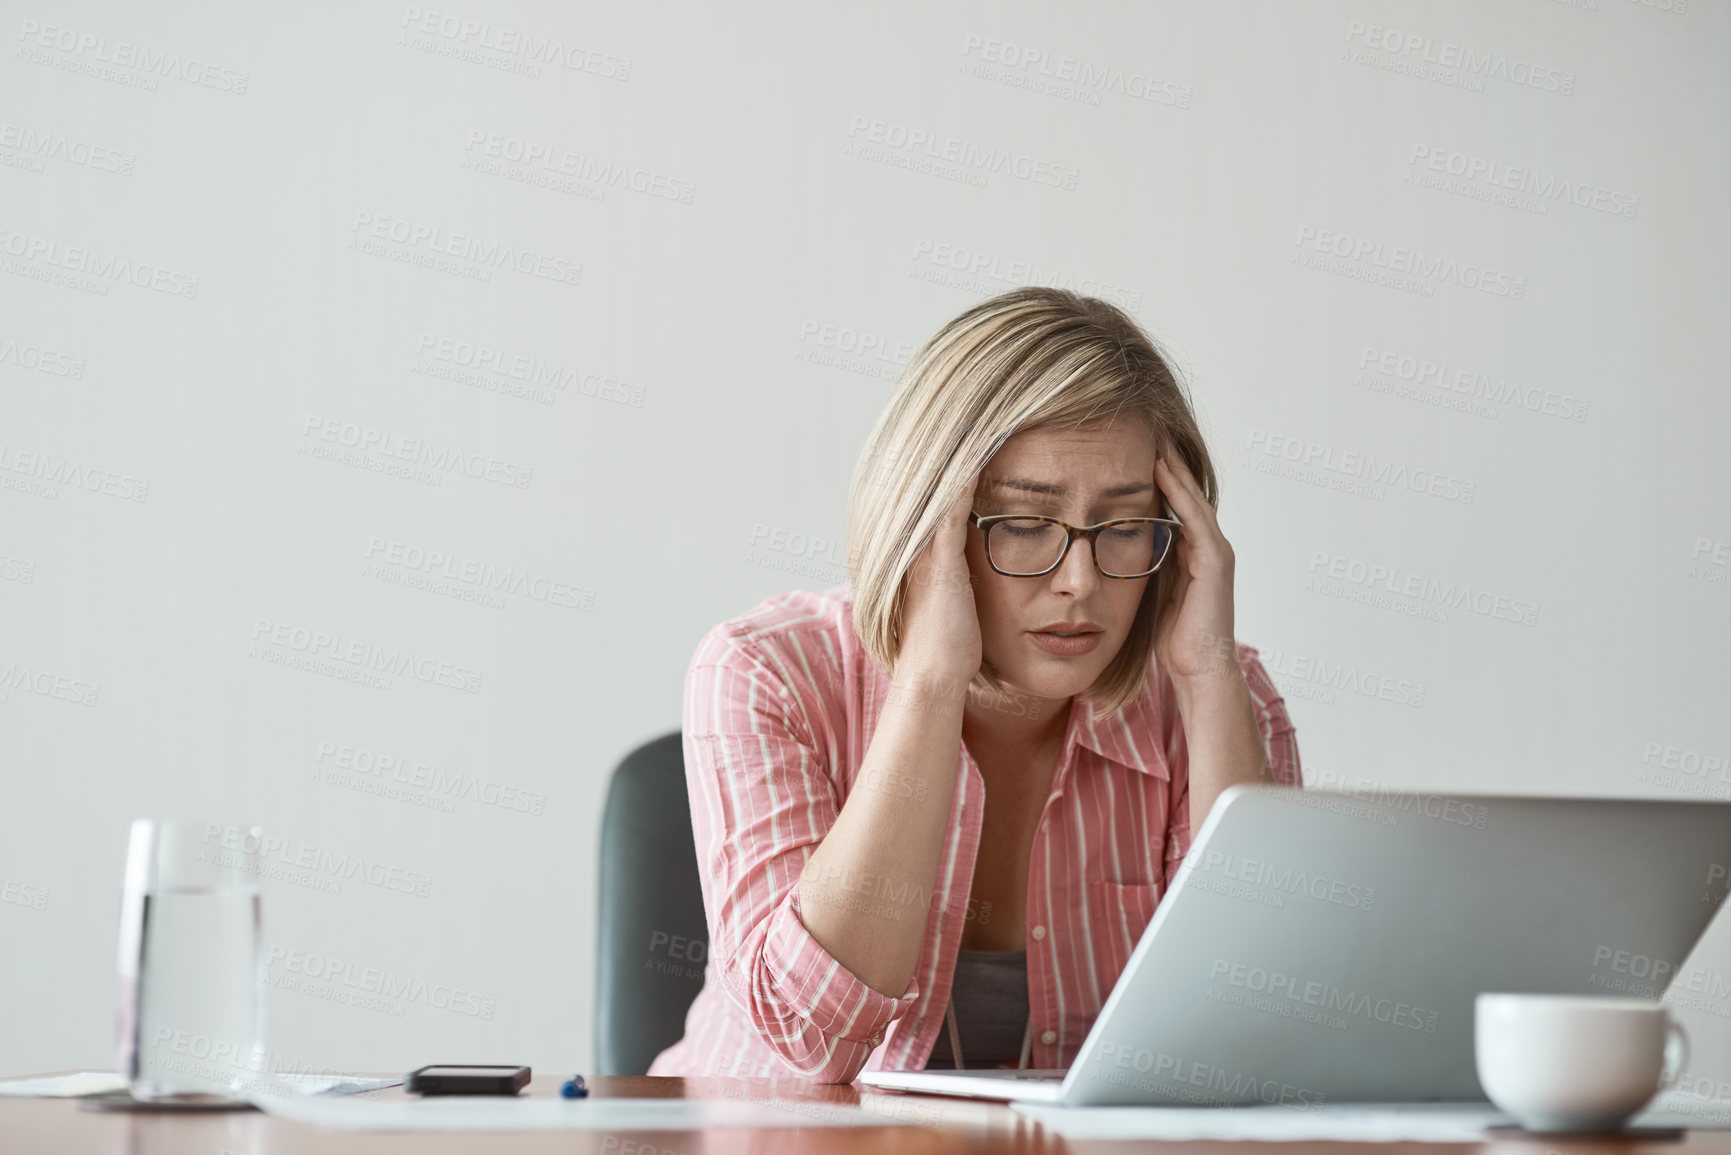 Buy stock photo Studio shot of a businesswoman looking stressed out while working on a laptop against a grey background